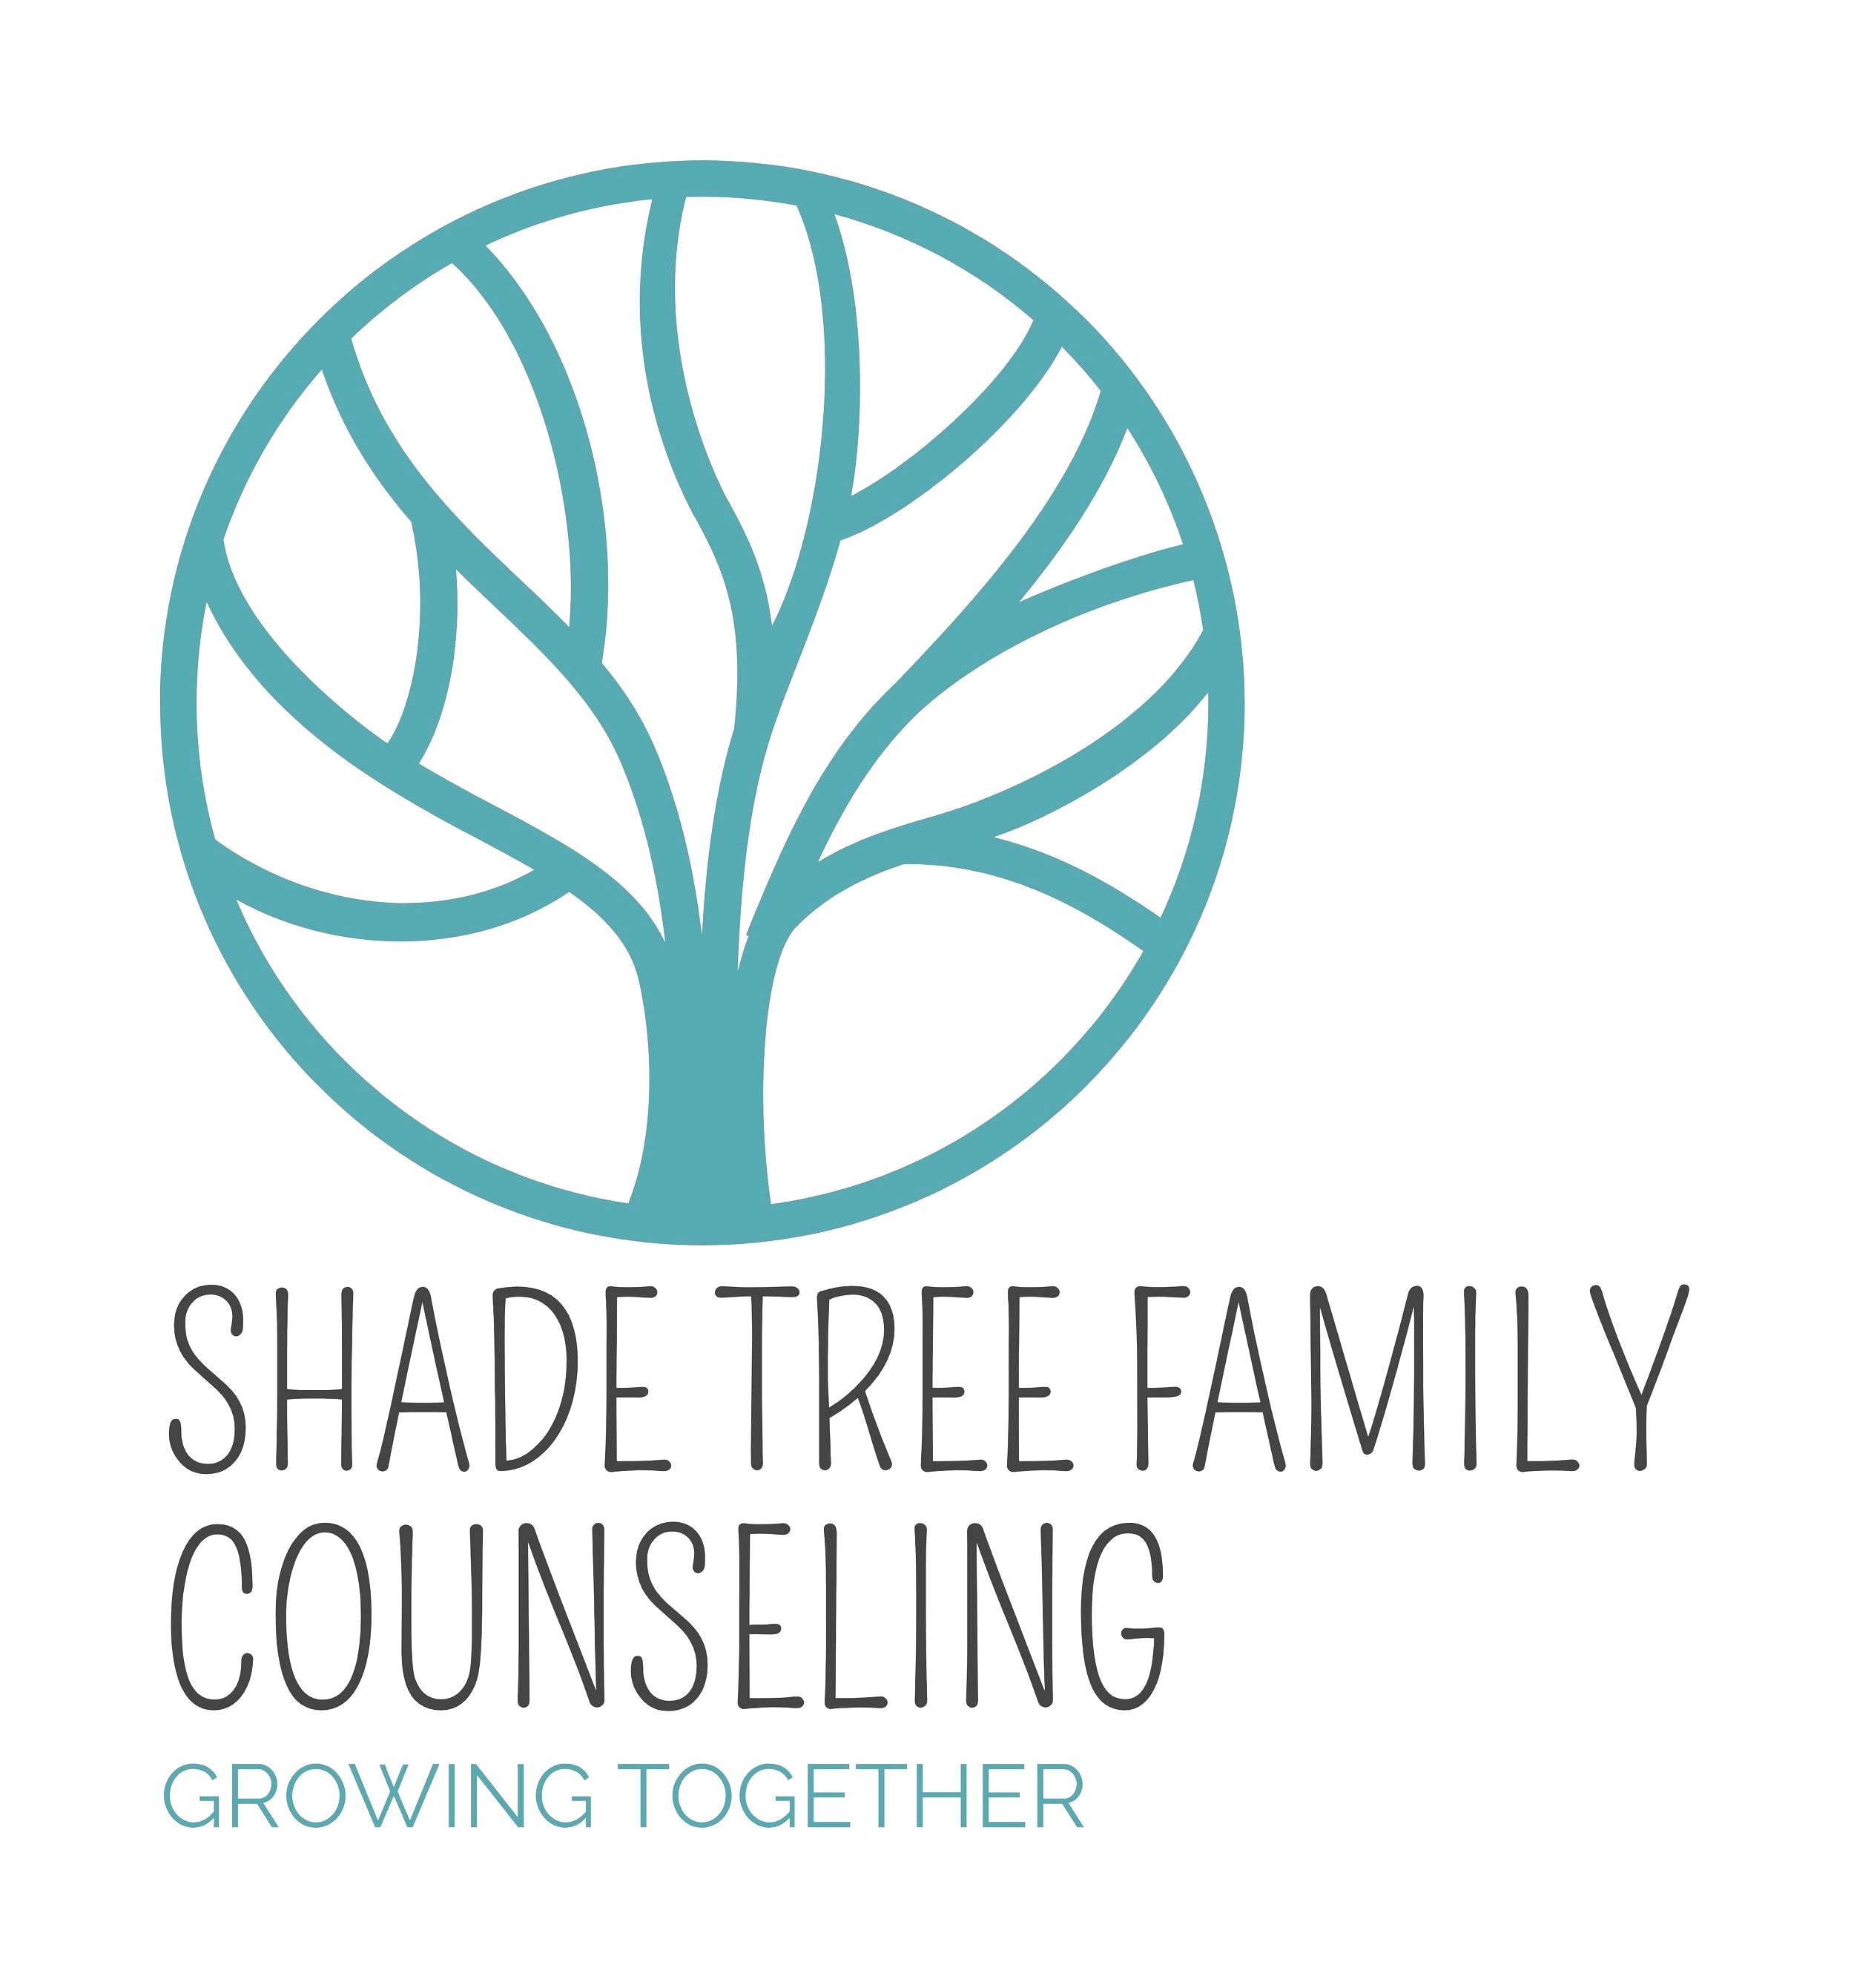 Shade Tree Family Counseling